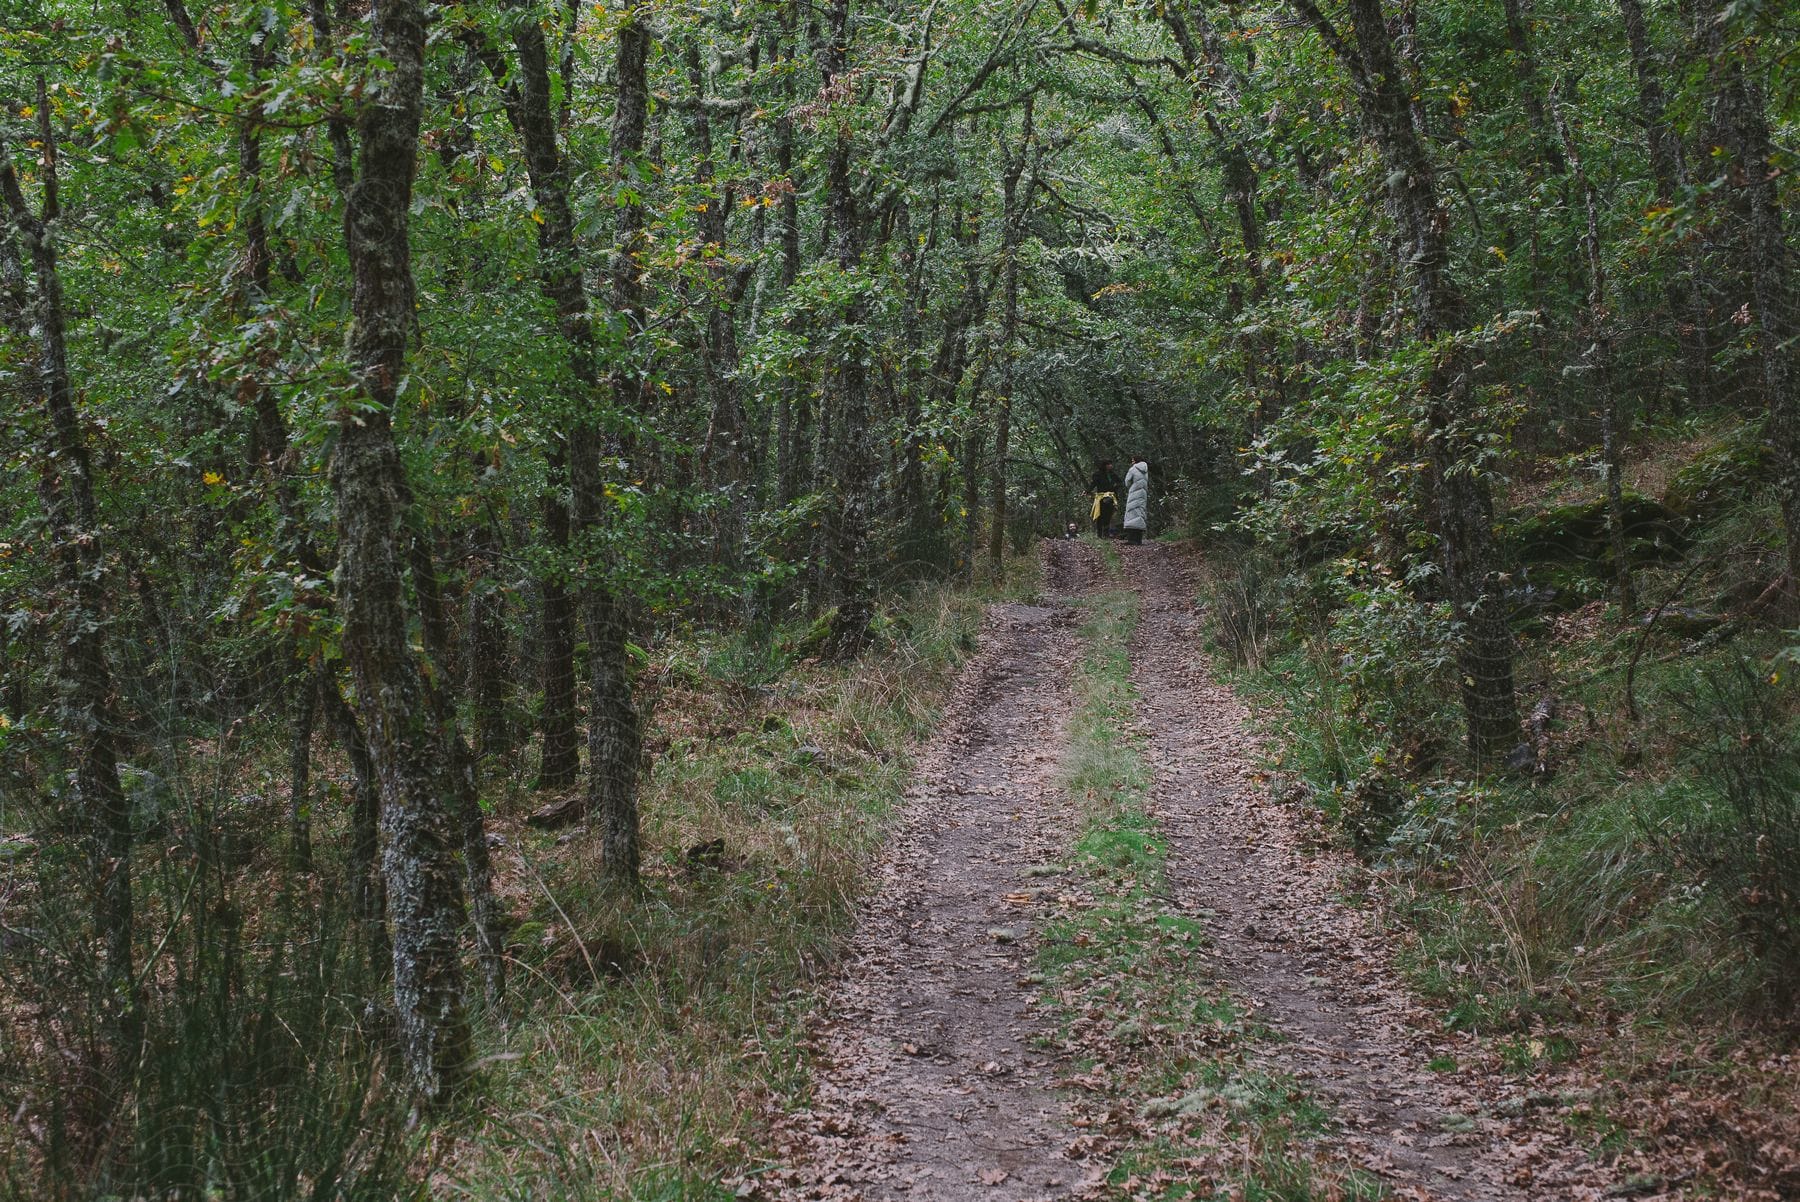 Two people are walking along a path in the woods, where tire tracks are visible, during the daytime.